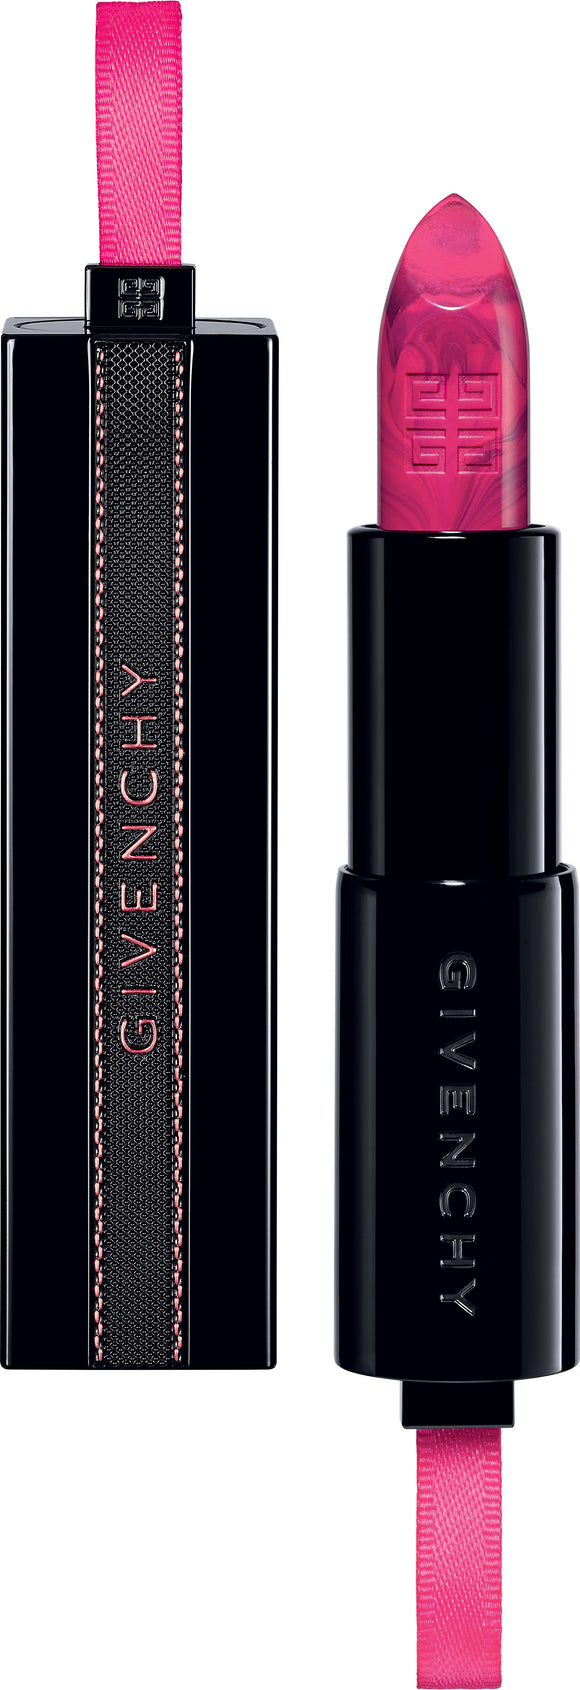 GIVENCHY ROUGE INTERDIT MARBLED LIPSTICK - 27